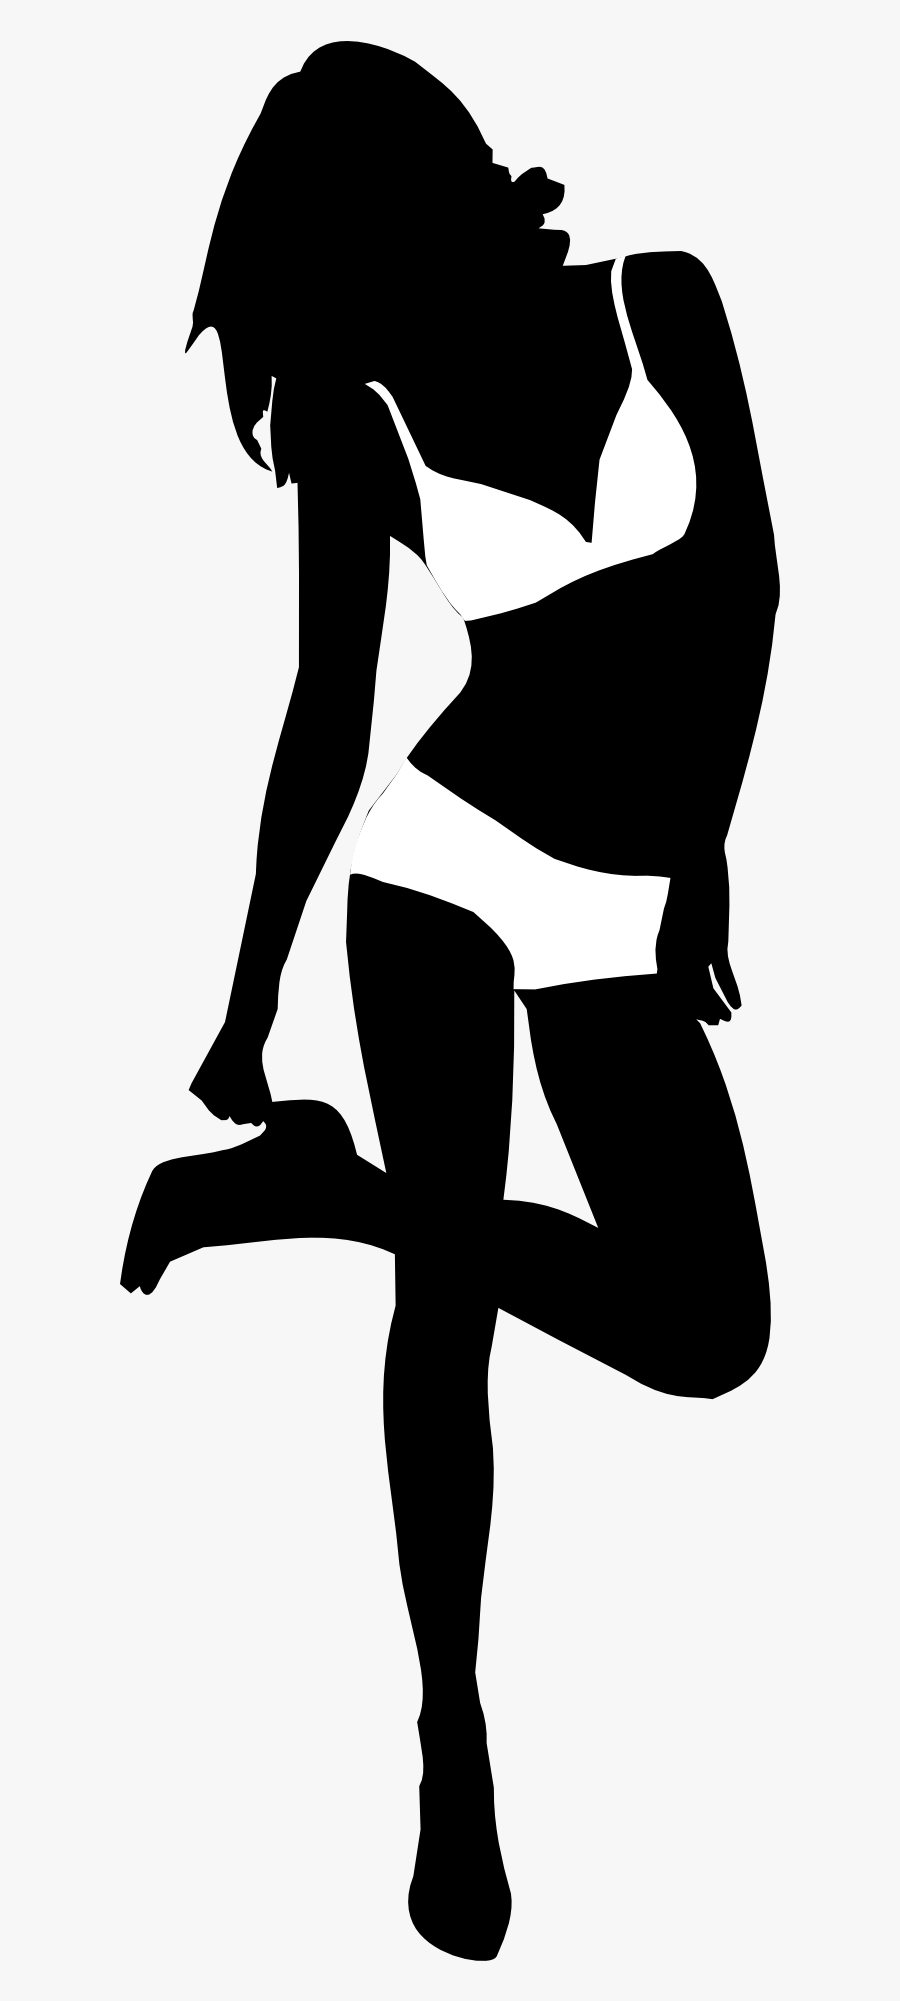 Hot Girls Silhouette Png, Transparent Clipart